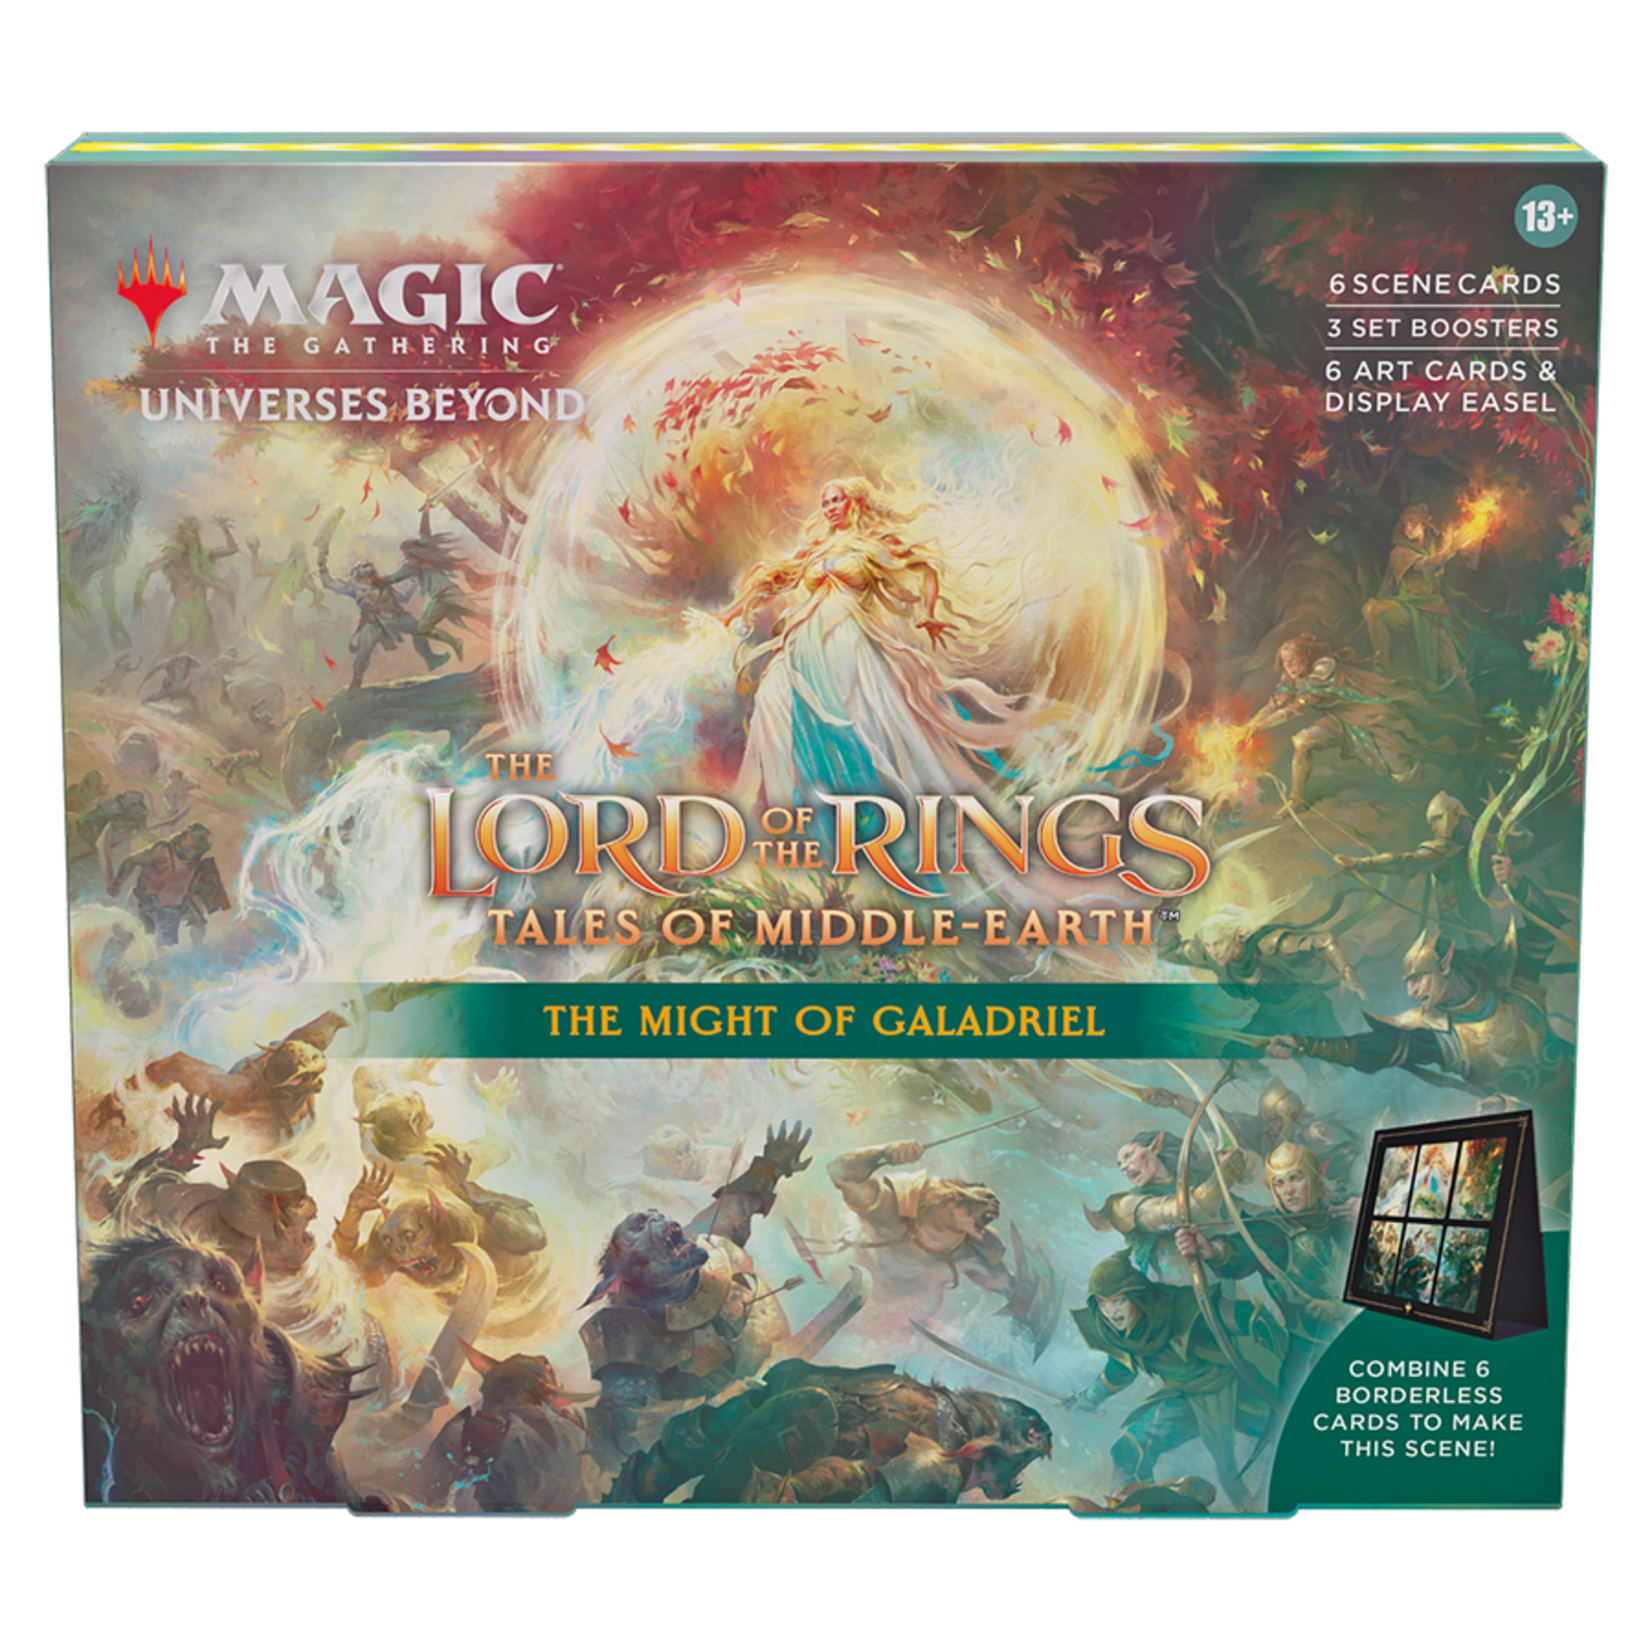 Wizards of the Coast The Lord of the Rings Tales of Middle-Earth - The Might of Galadriel Scene Box